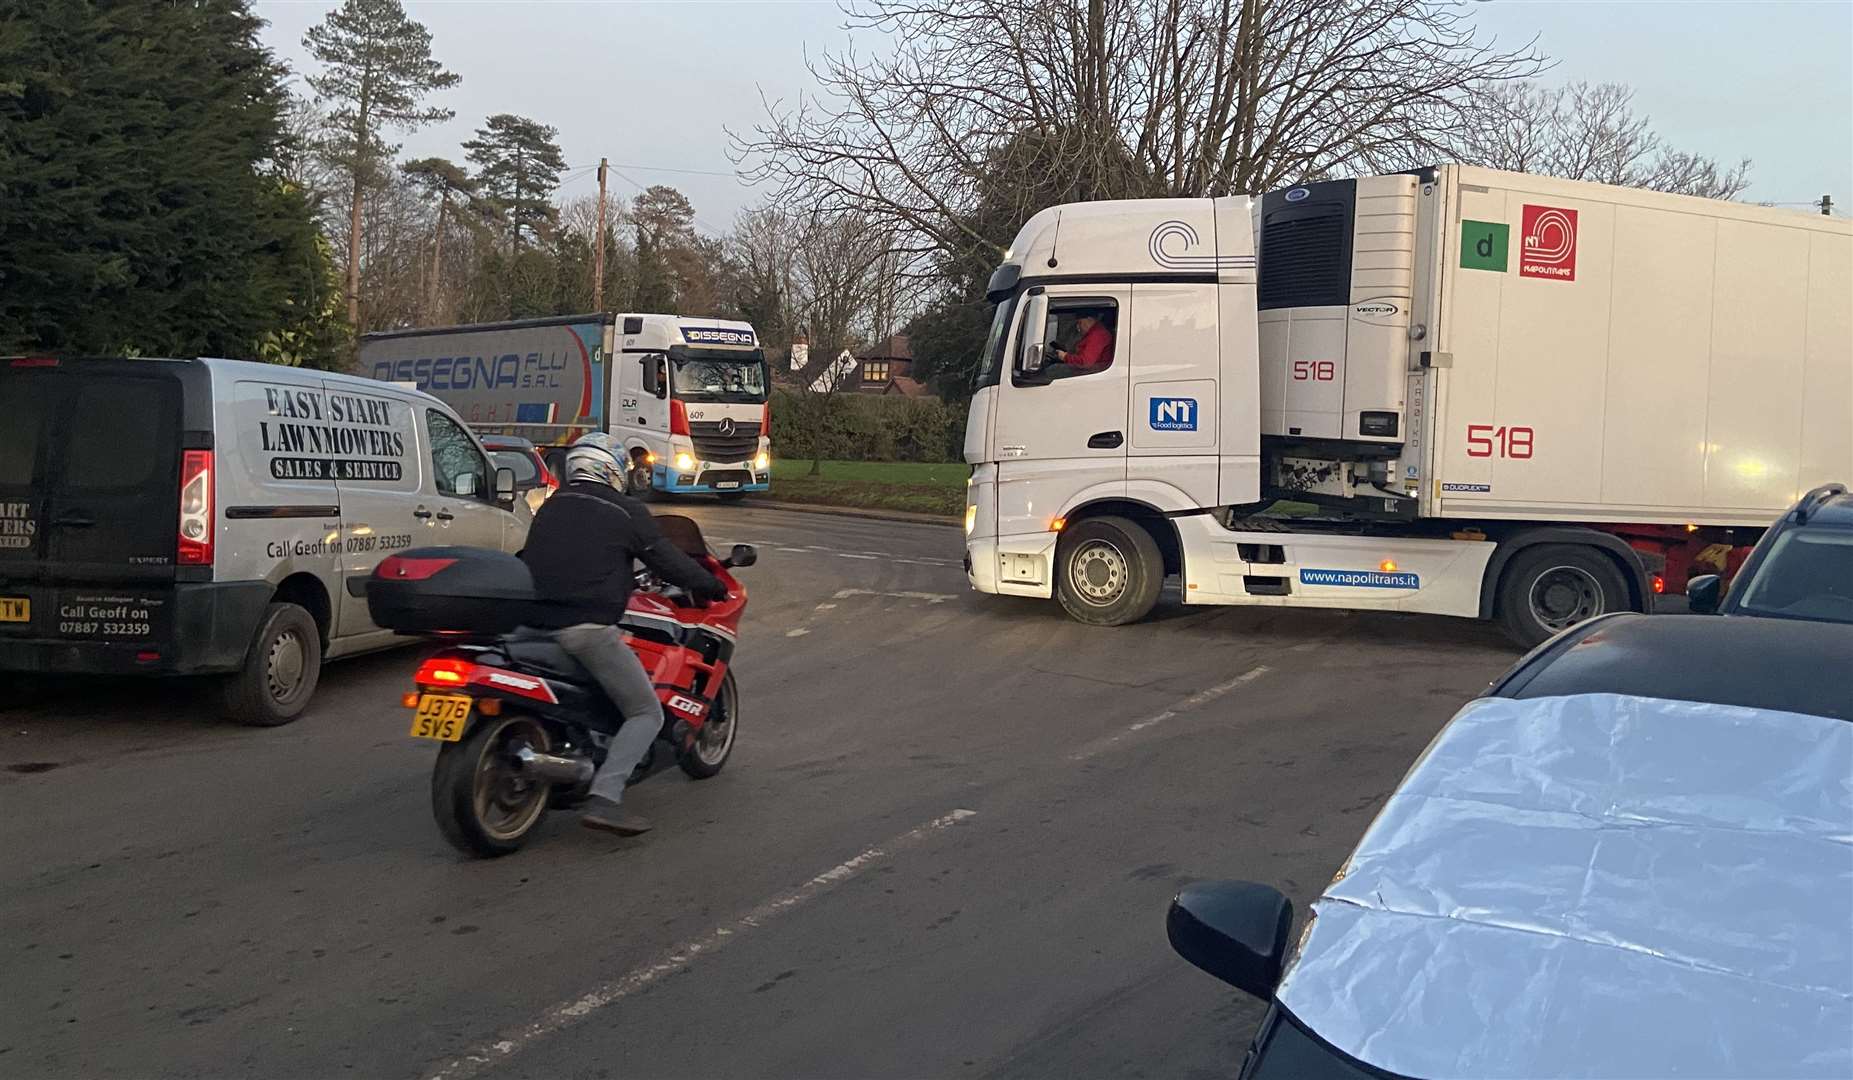 HGV drivers have been getting stuck in Mersham for months; this photo shows one incident in January. Picture: Stewart Ross